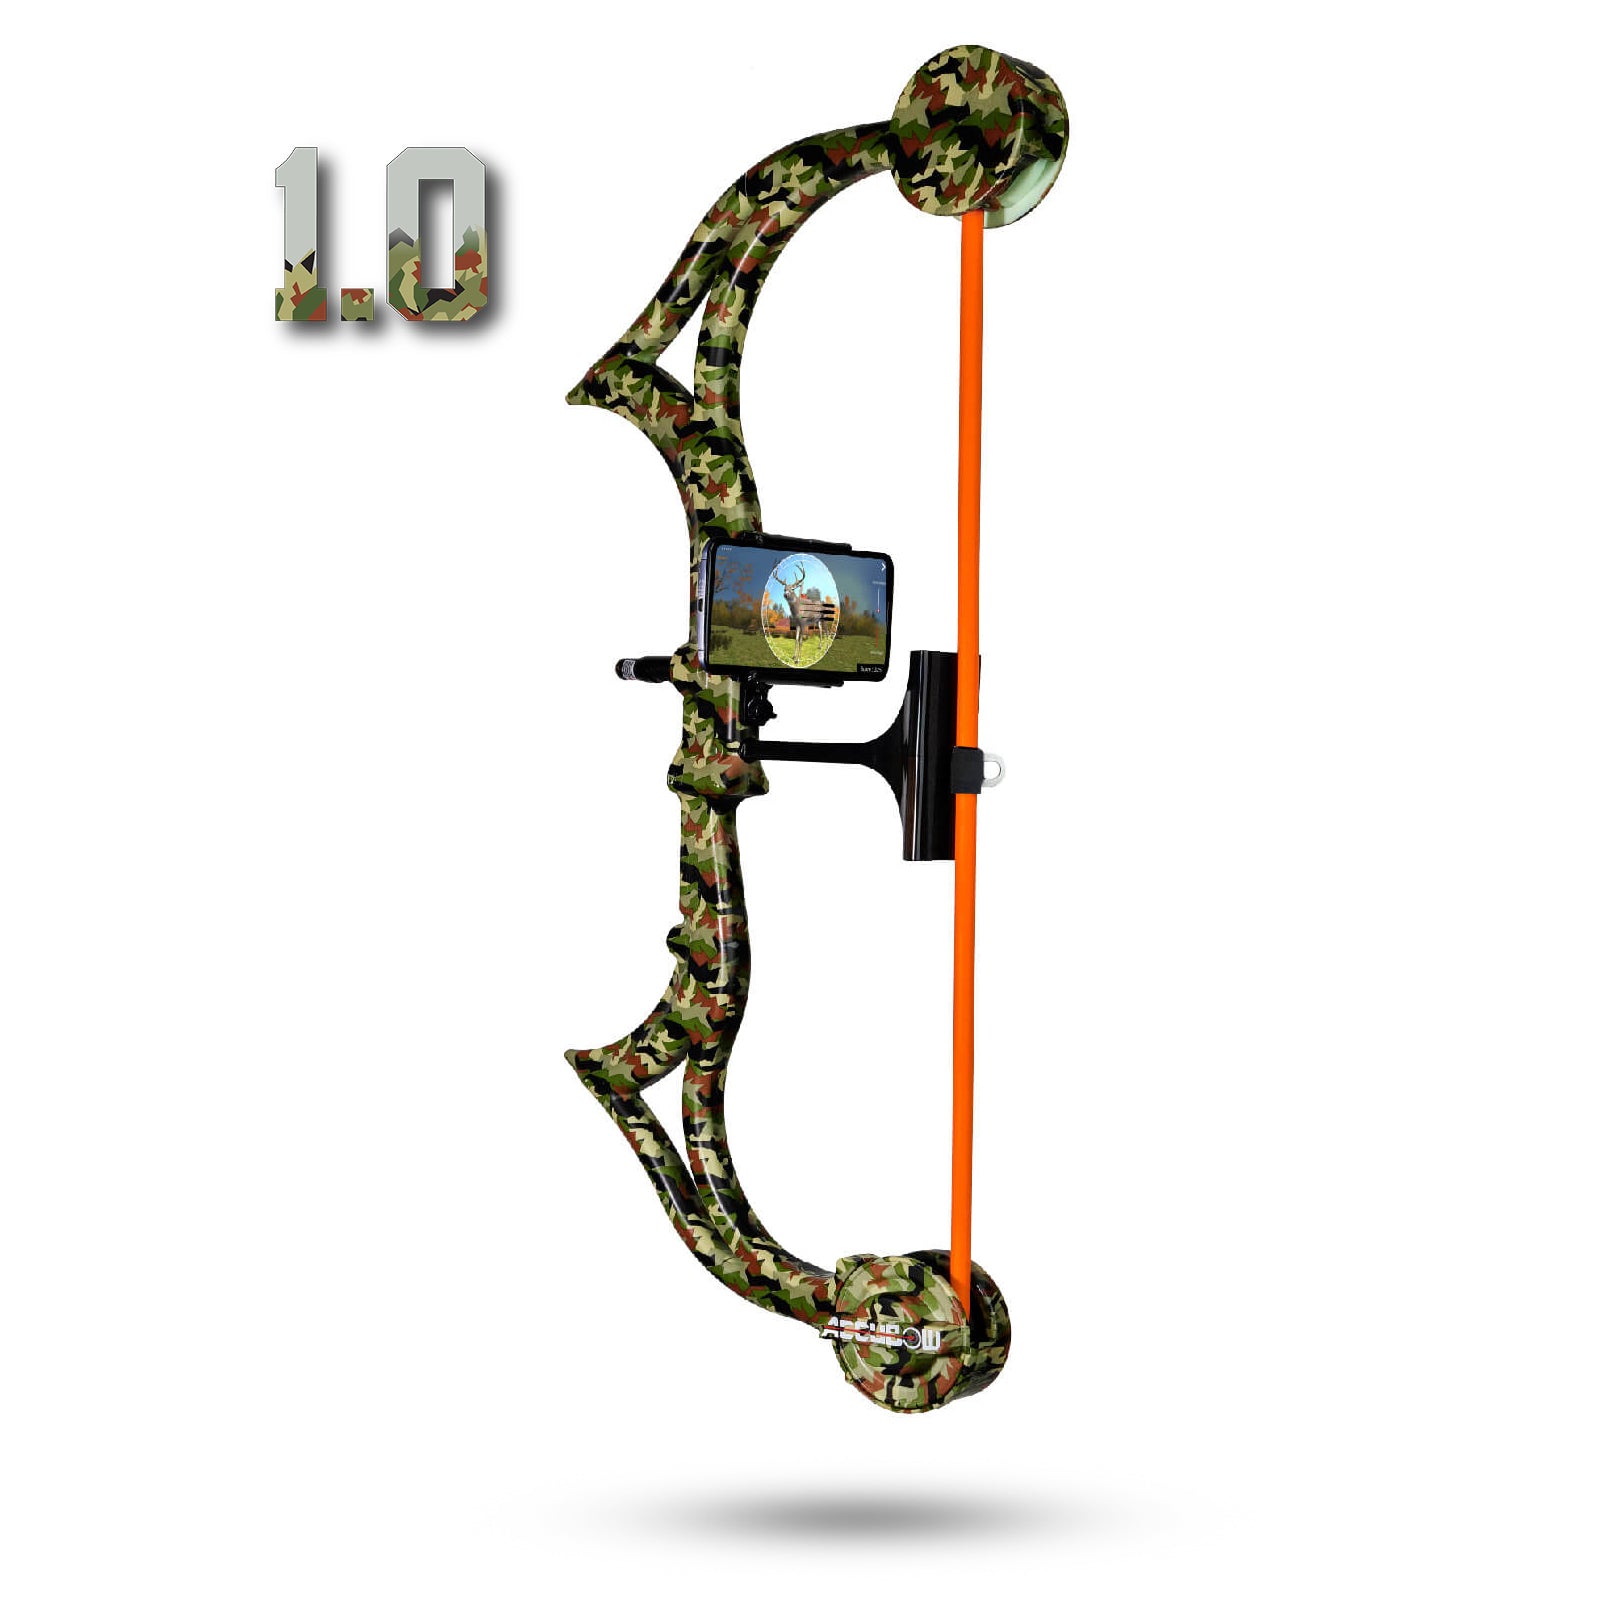 1.0 Forest Camo Archery Trainer, Training Bows